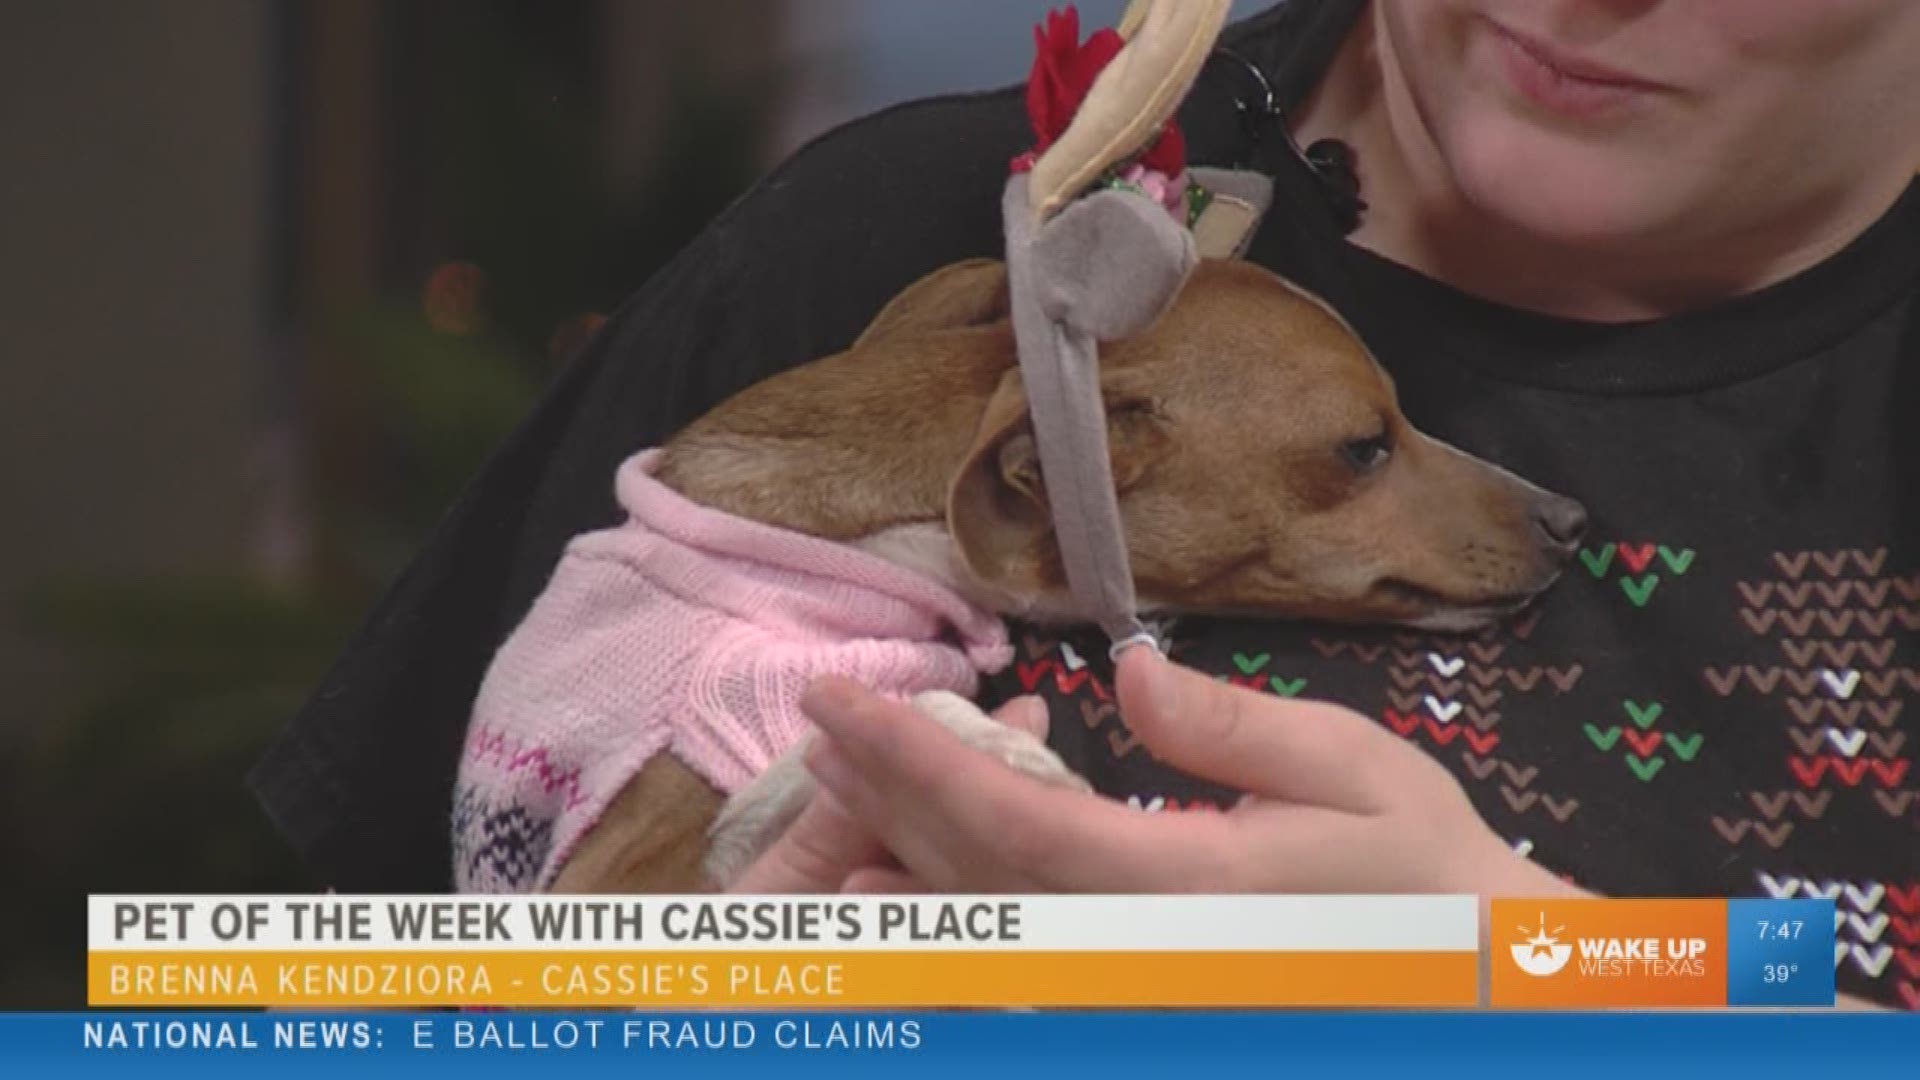 Our Malik Mingo speaks with Cassie's Place about their pet of the week.